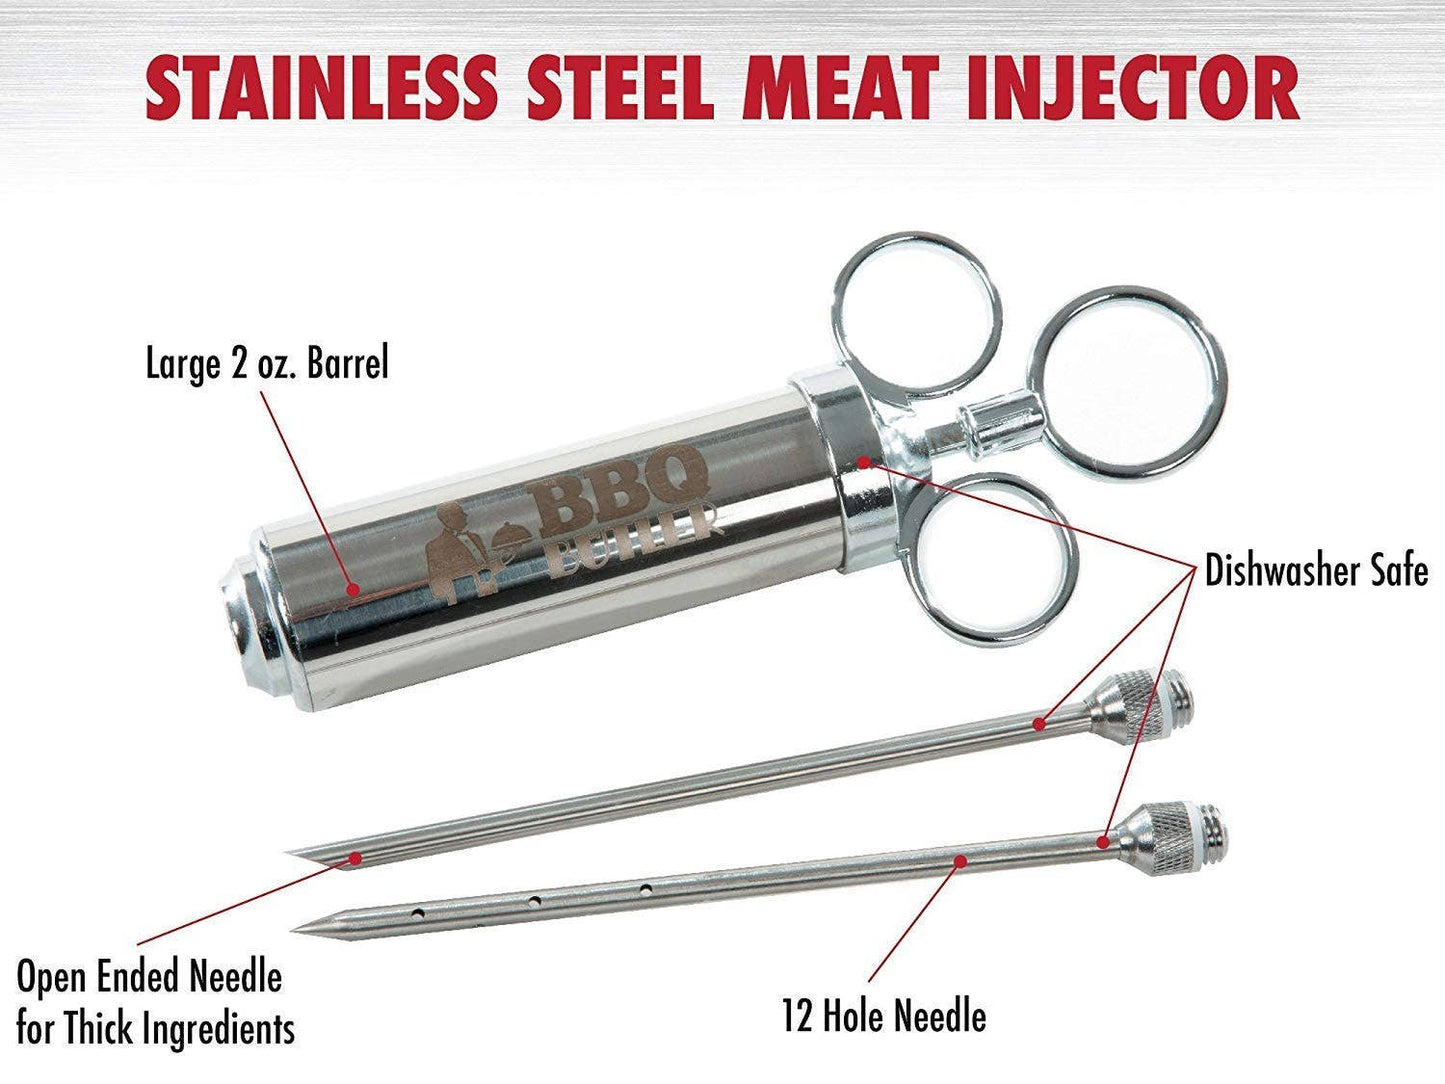 BBQ Butler Meat Injector